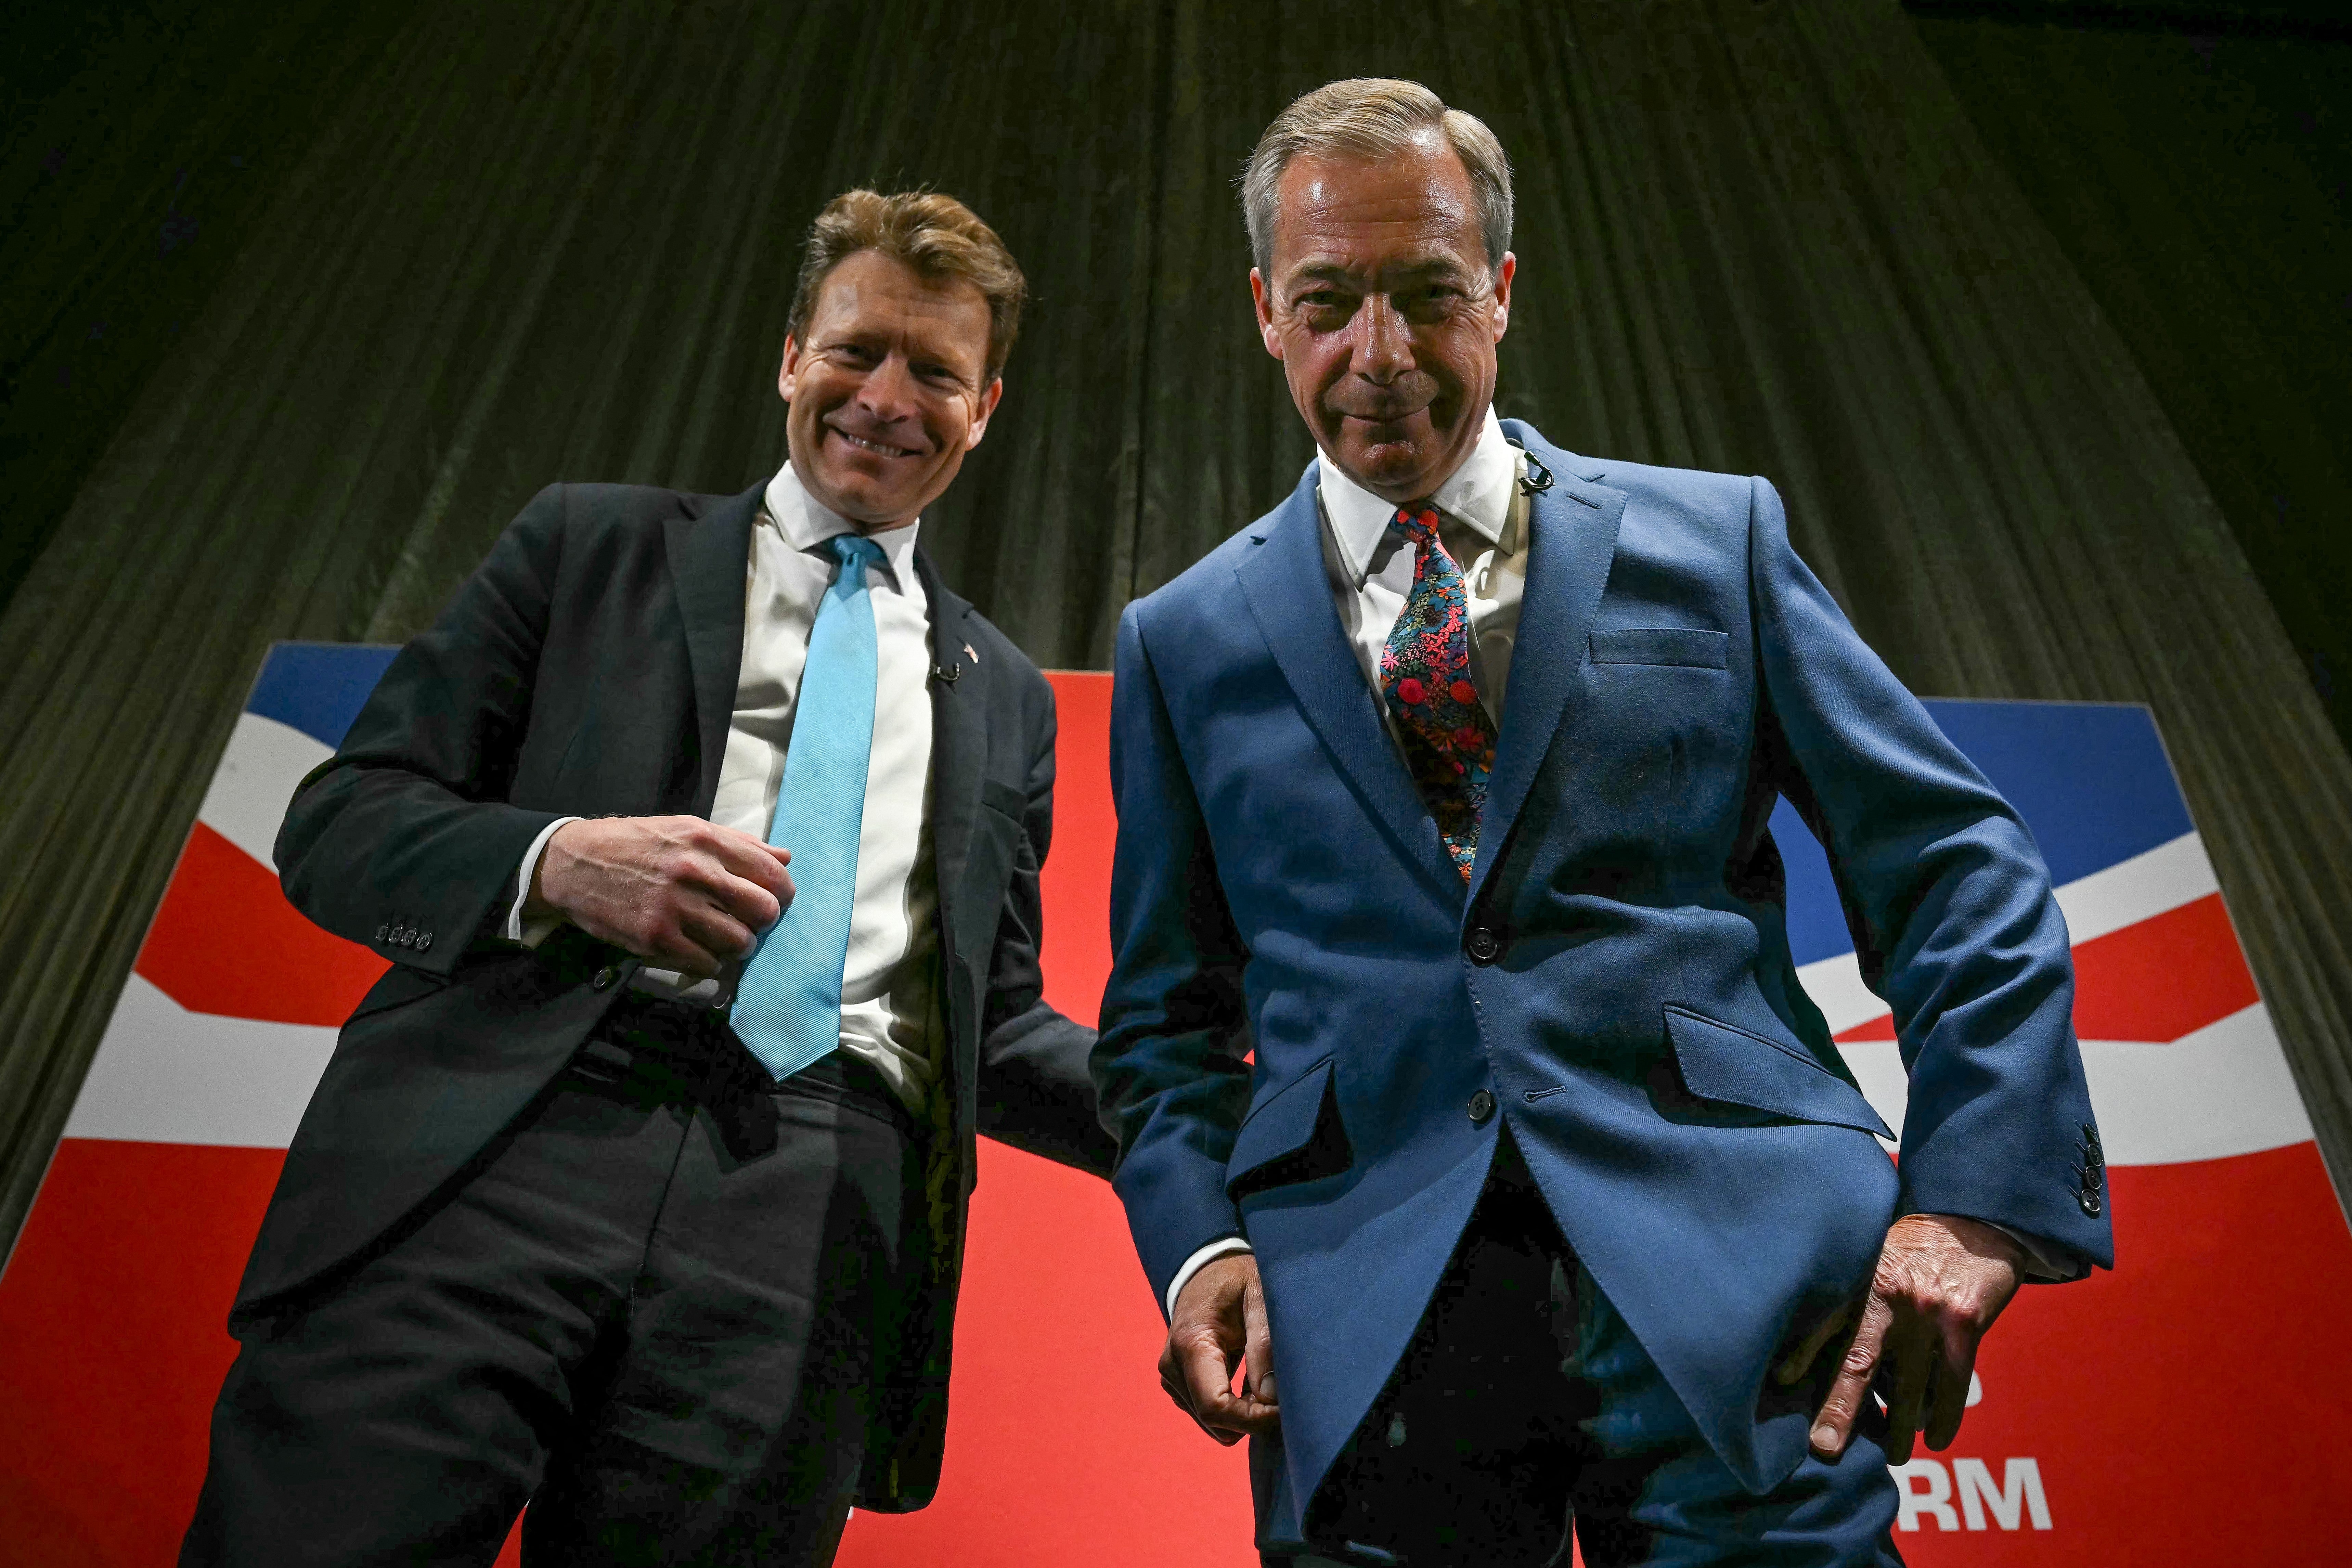 Nigel Farage and Richard Tice took aim at barber shops during the launch of Reform UK’s immigration policy